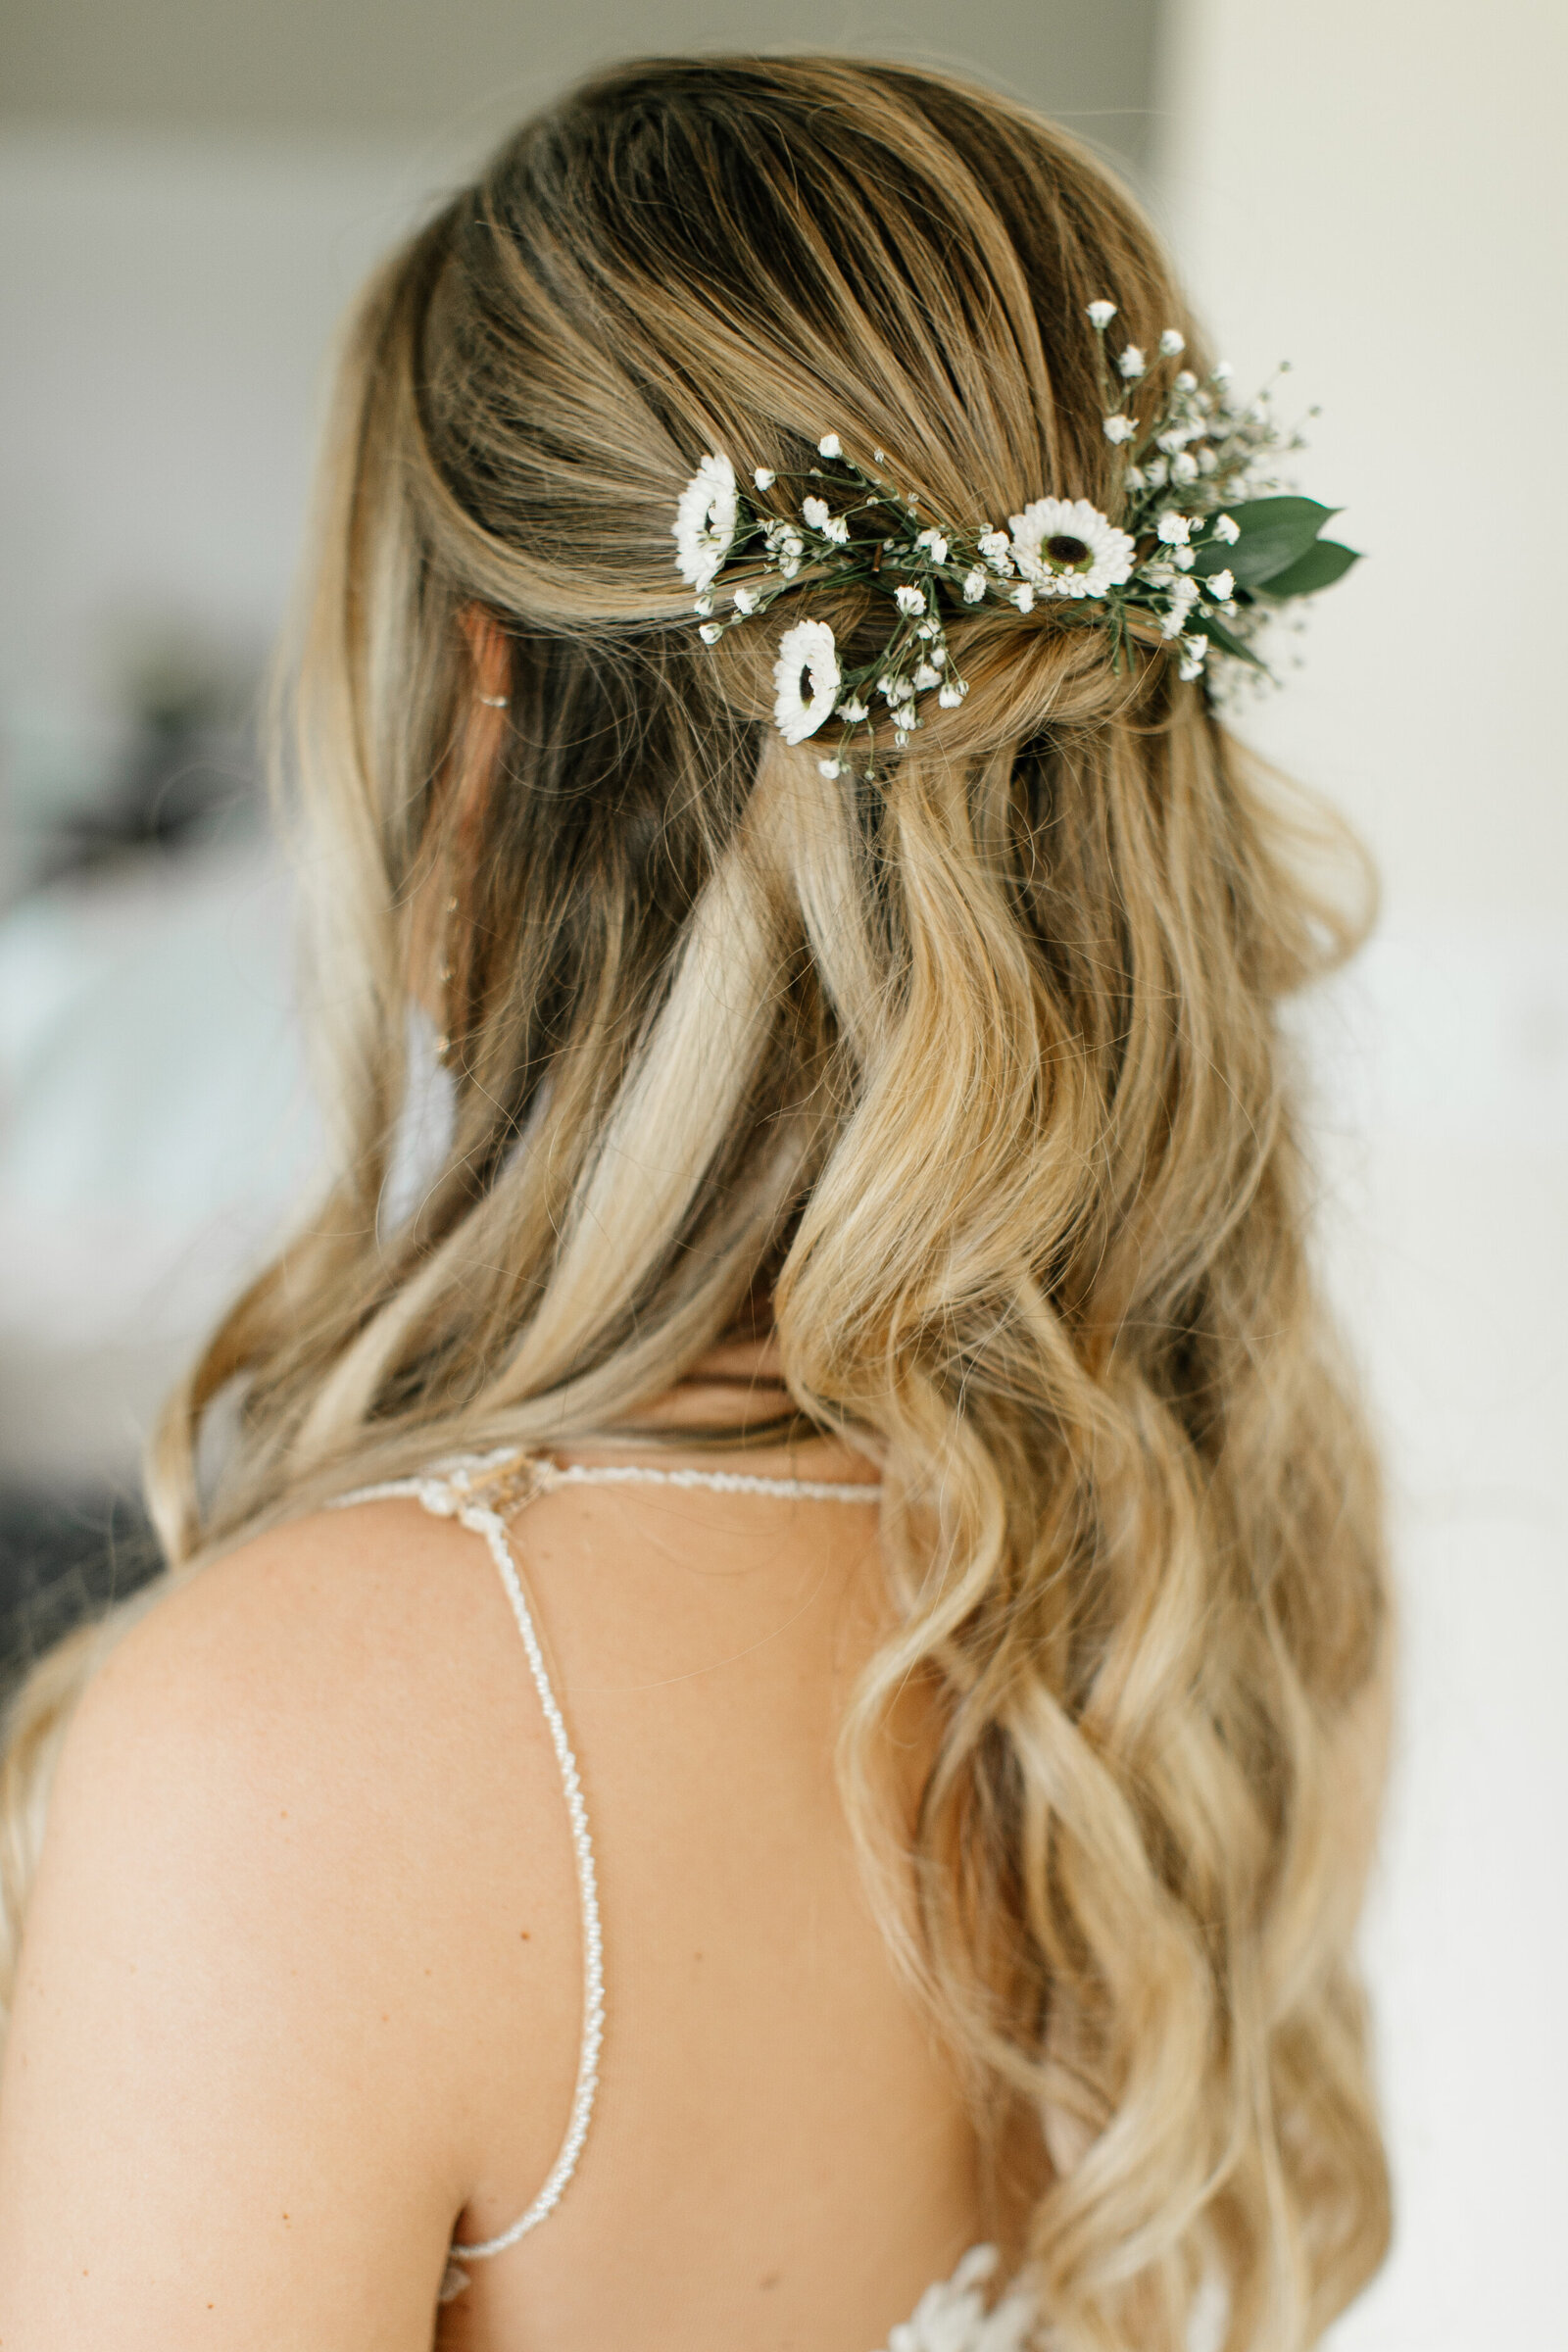 Blonde-haired bride turned to  show only her bridal hair with flowers.